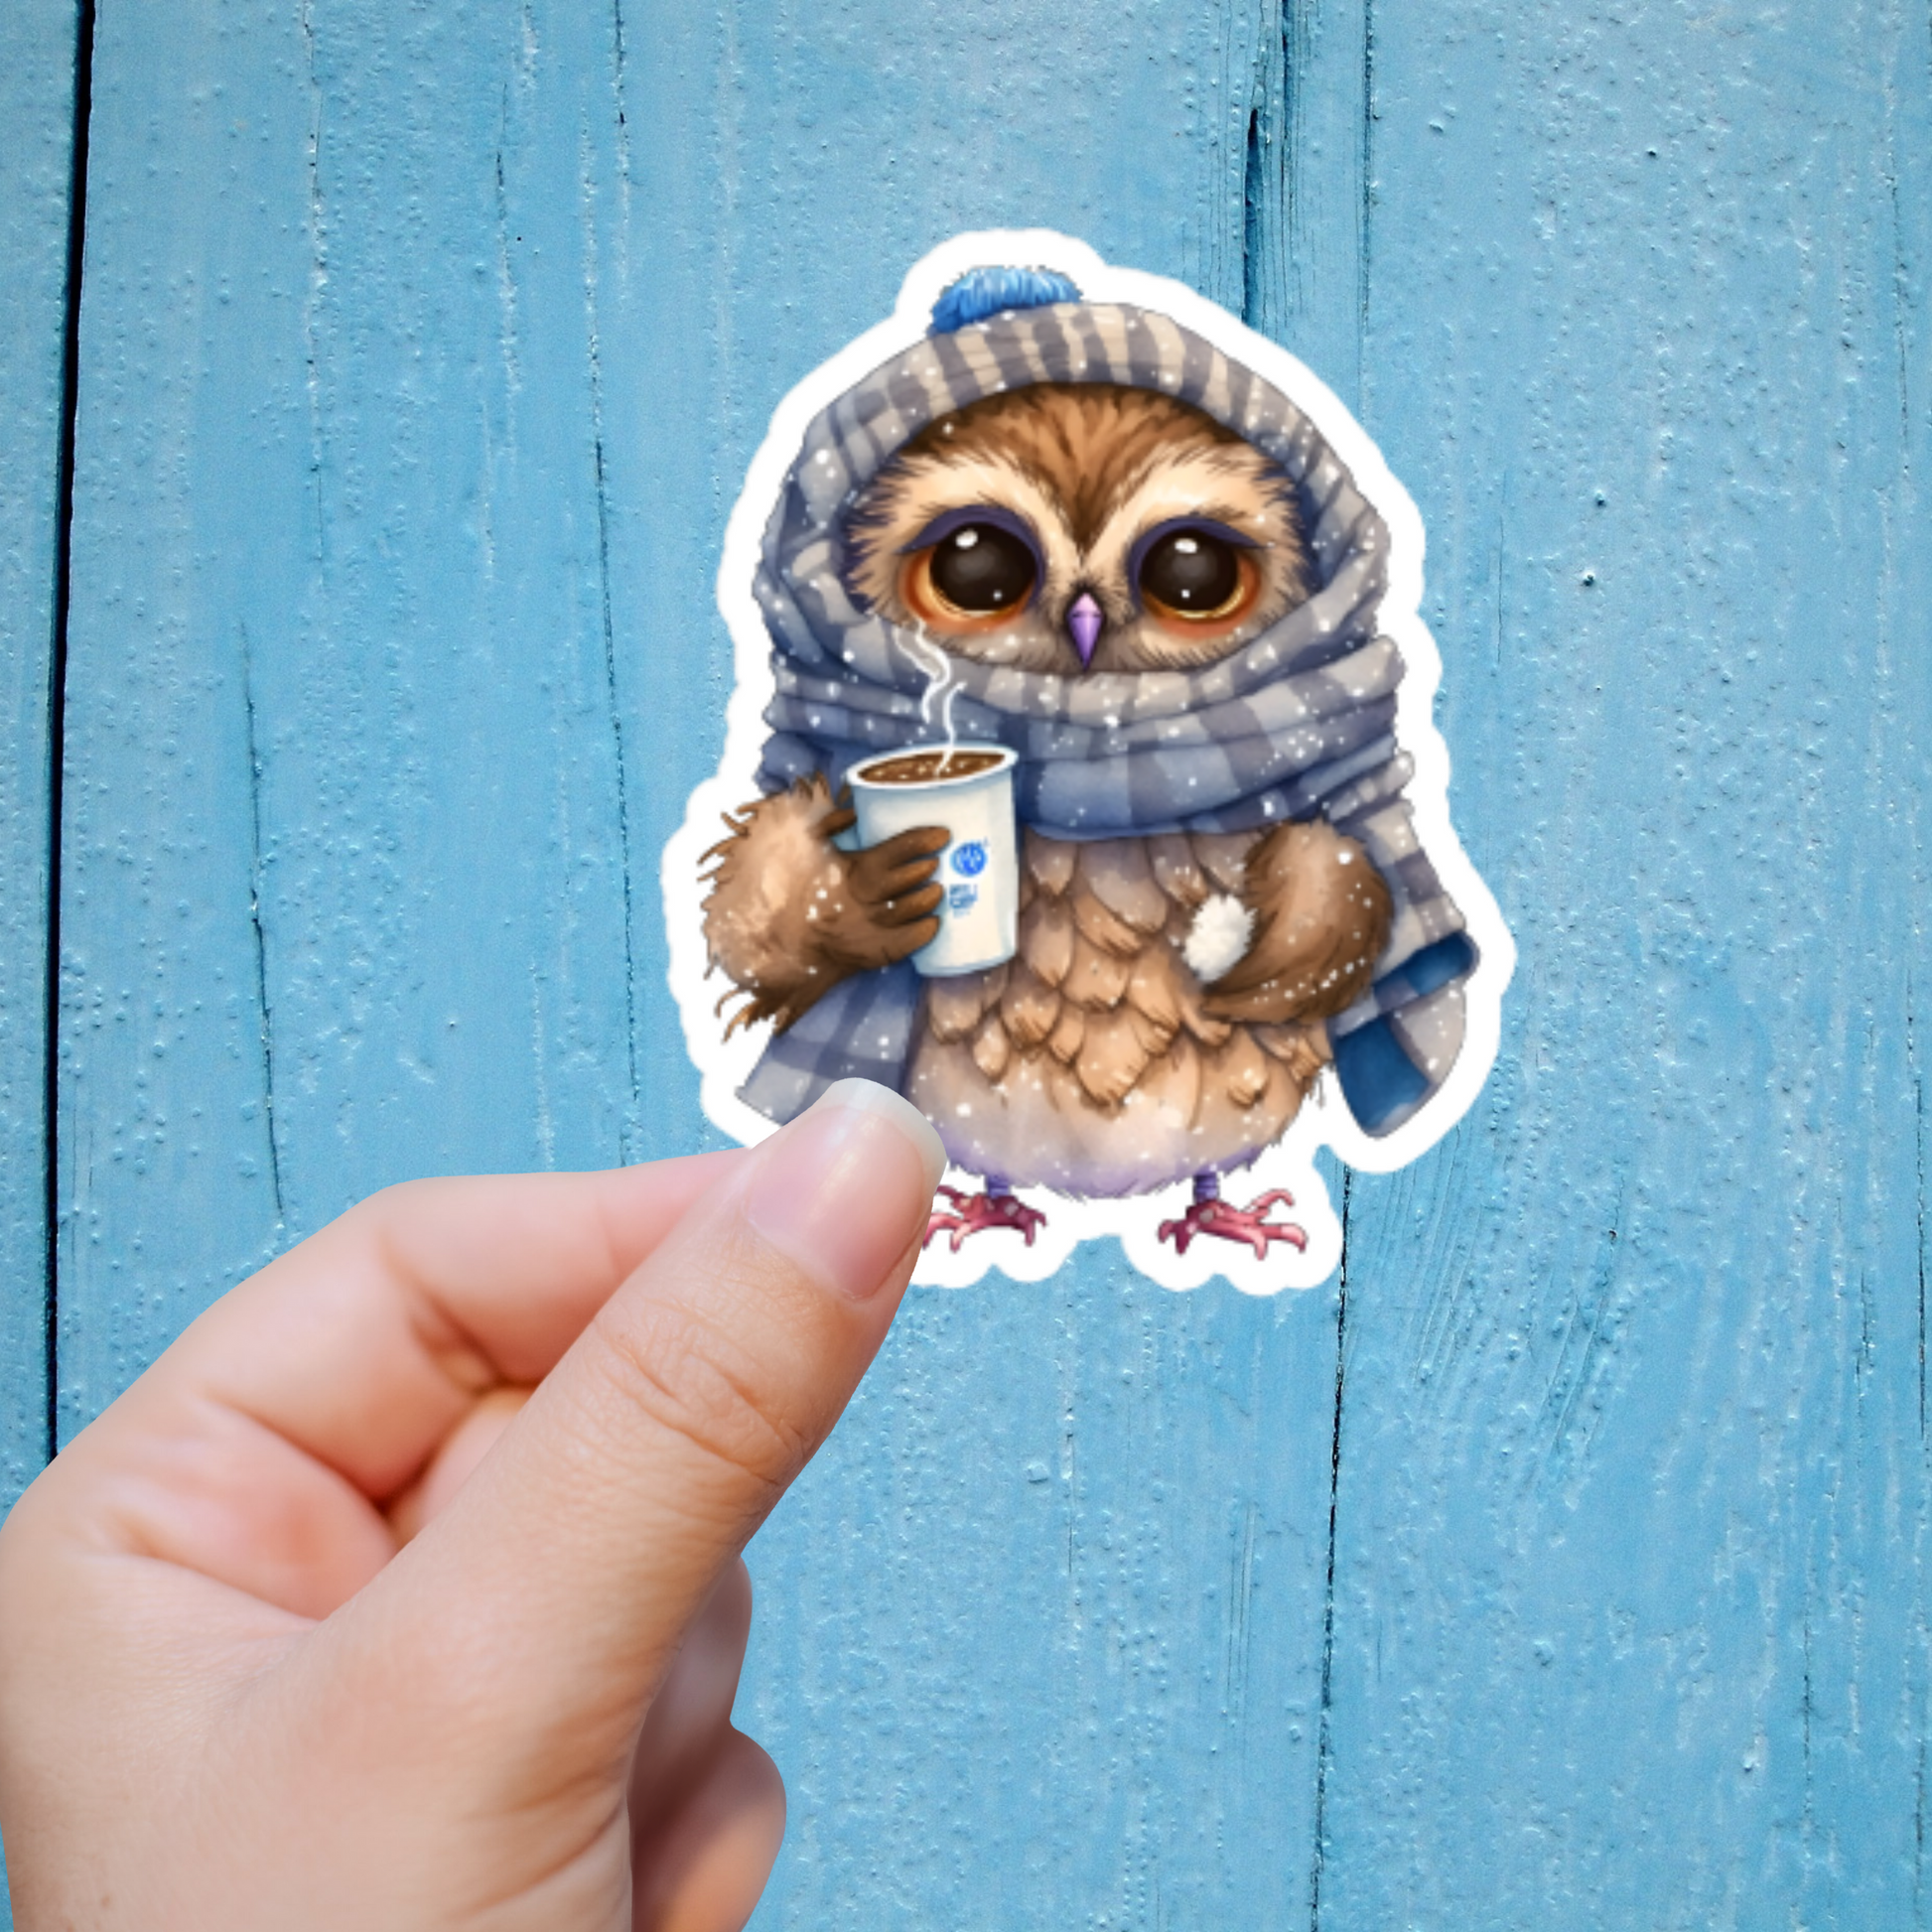 Hand holding a sticker of a Chibi style owl wearing a winter hat and scarf holding a hot coffee